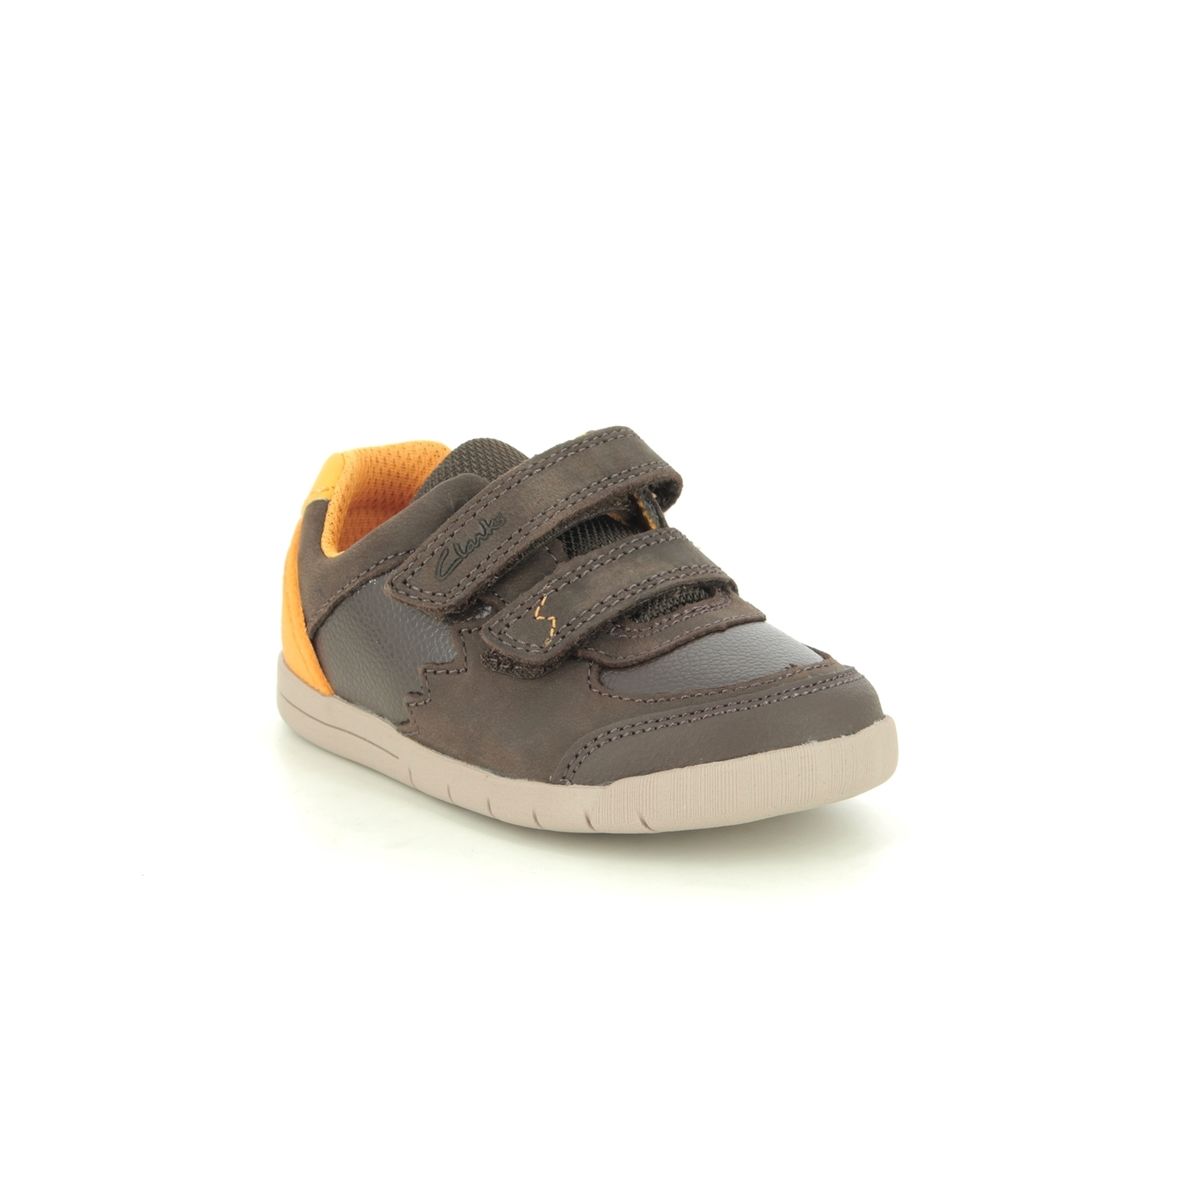 Clarks Rex Quest T Brown Leather Kids Boys Toddler Shoes 567757G In Size 4.5 In Plain Brown Leather G Width Fitting For kids